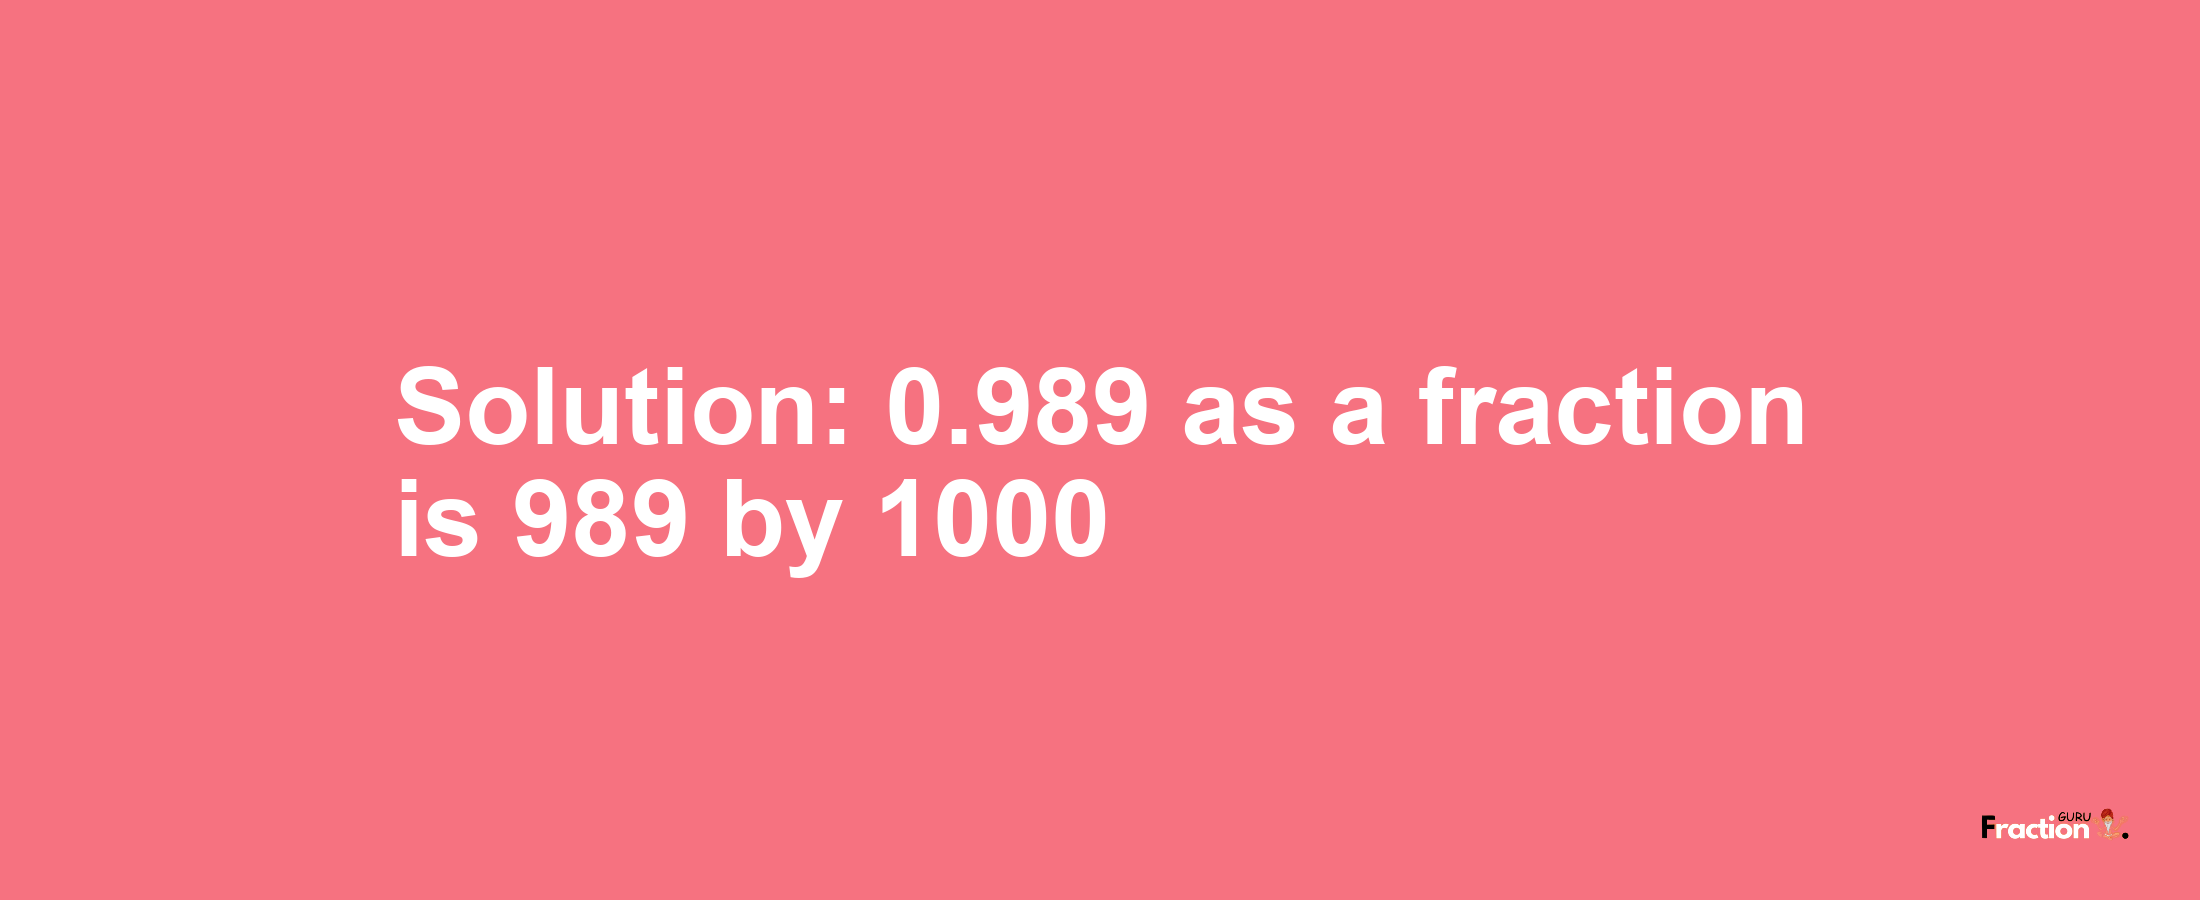 Solution:0.989 as a fraction is 989/1000